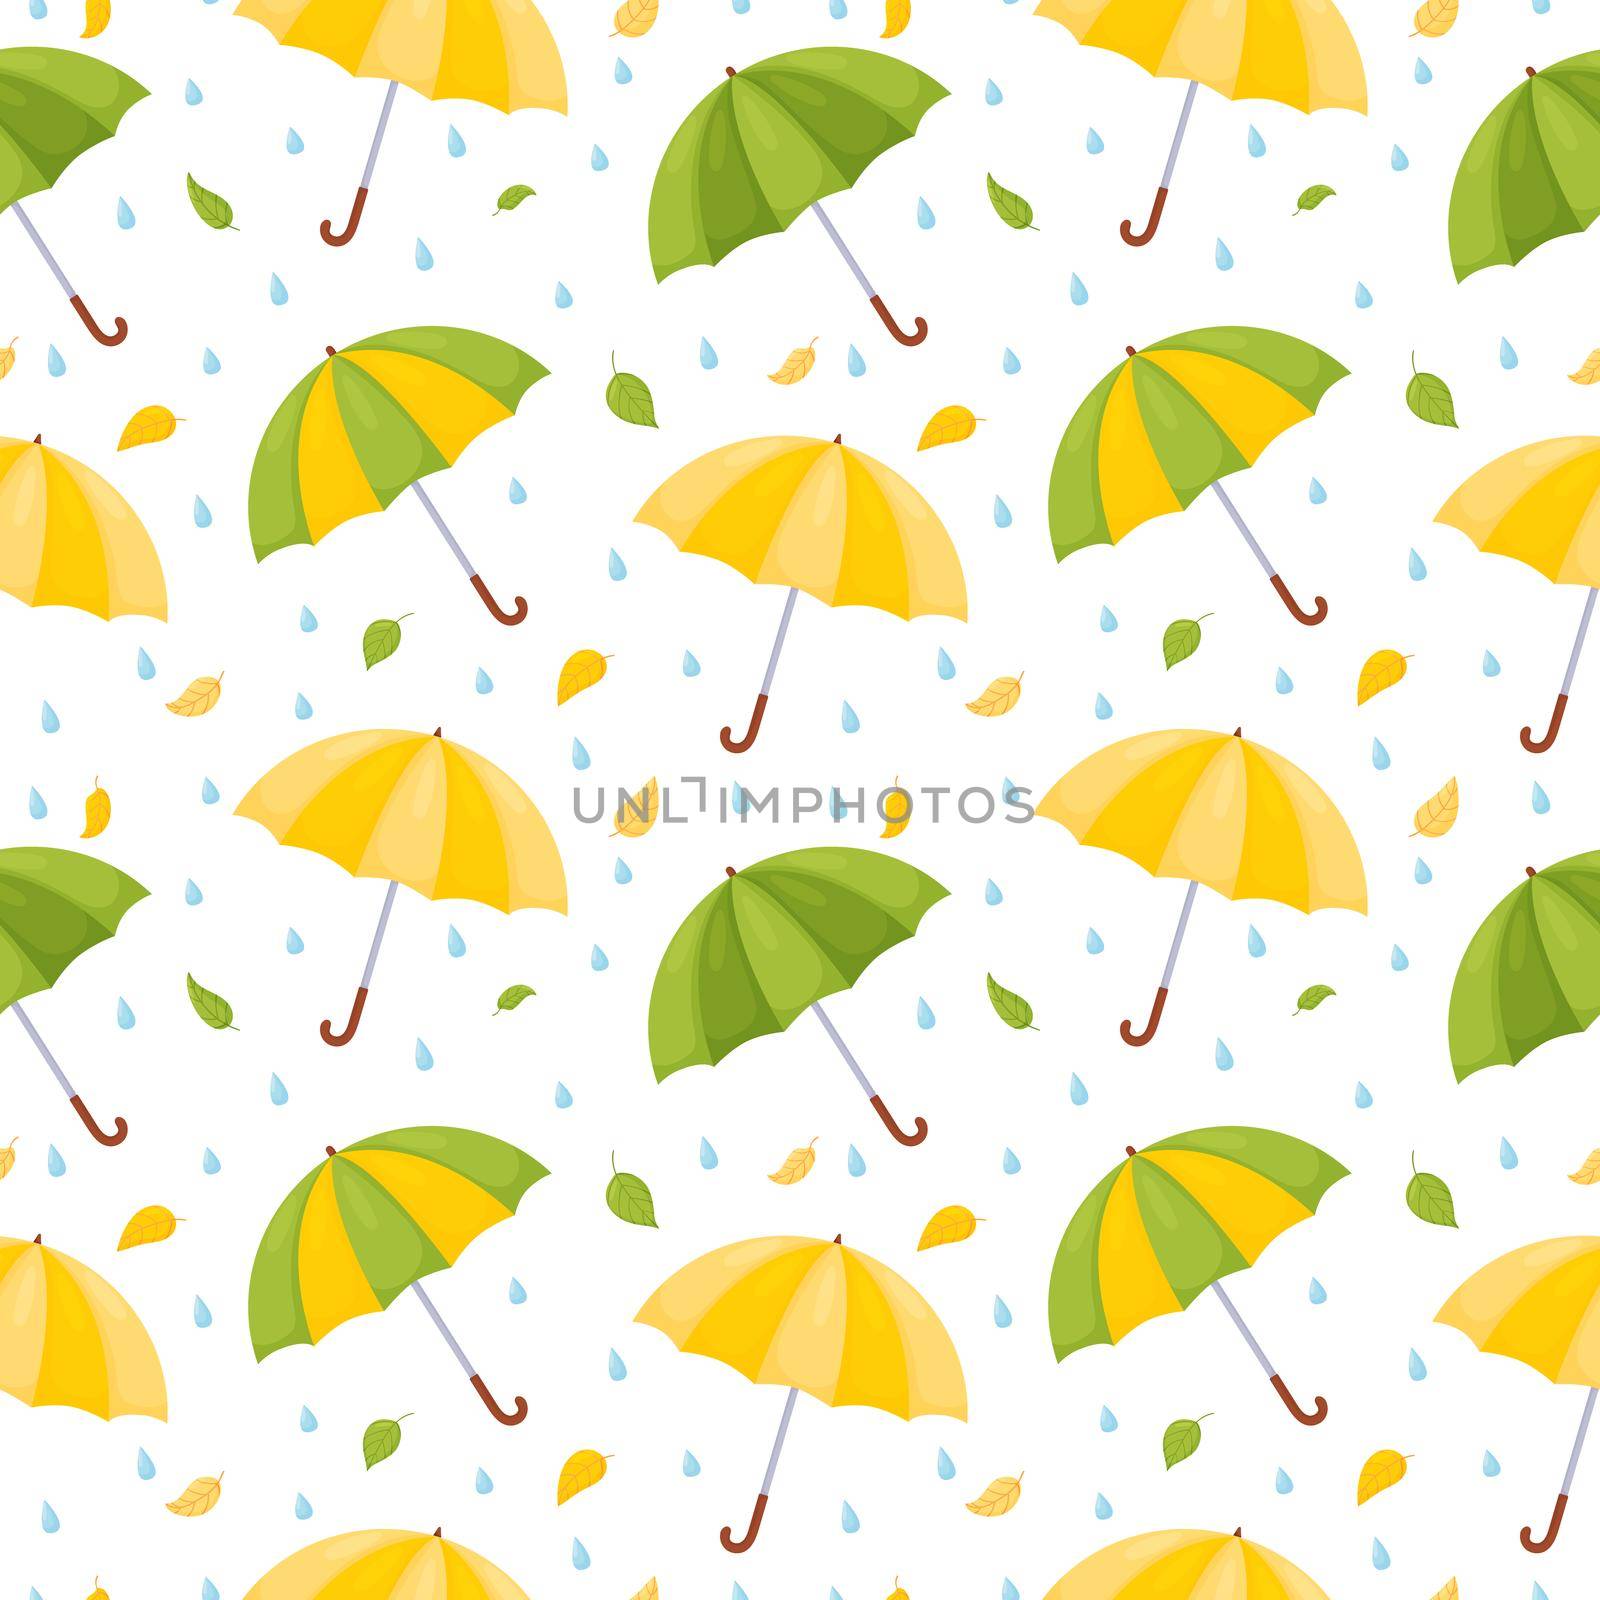 Seamless pattern with multicolored umbrellas, raindrops and falling leaves. by Lena_Khmelniuk